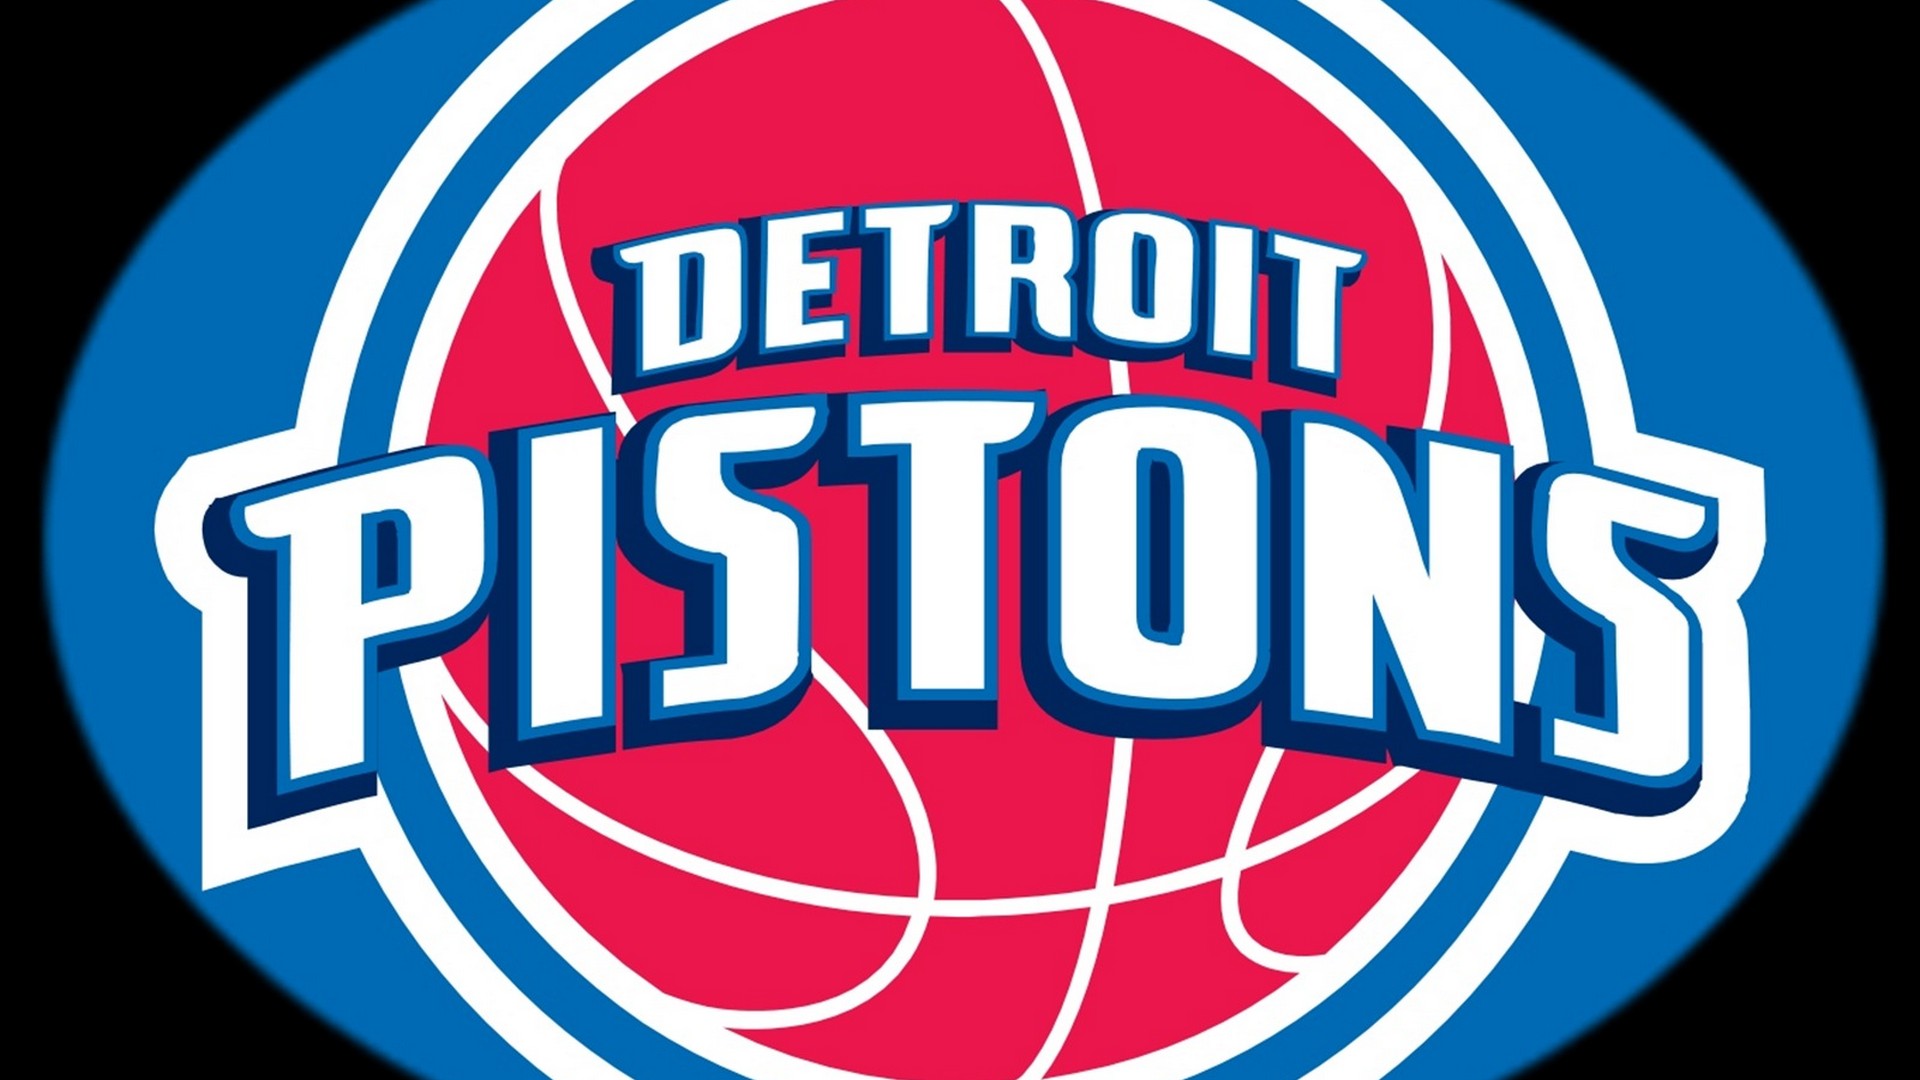 Wallpaper Desktop Detroit Pistons HD with high-resolution 1920x1080 pixel. You can use this wallpaper for your Desktop Computer Backgrounds, Windows or Mac Screensavers, iPhone Lock screen, Tablet or Android and another Mobile Phone device